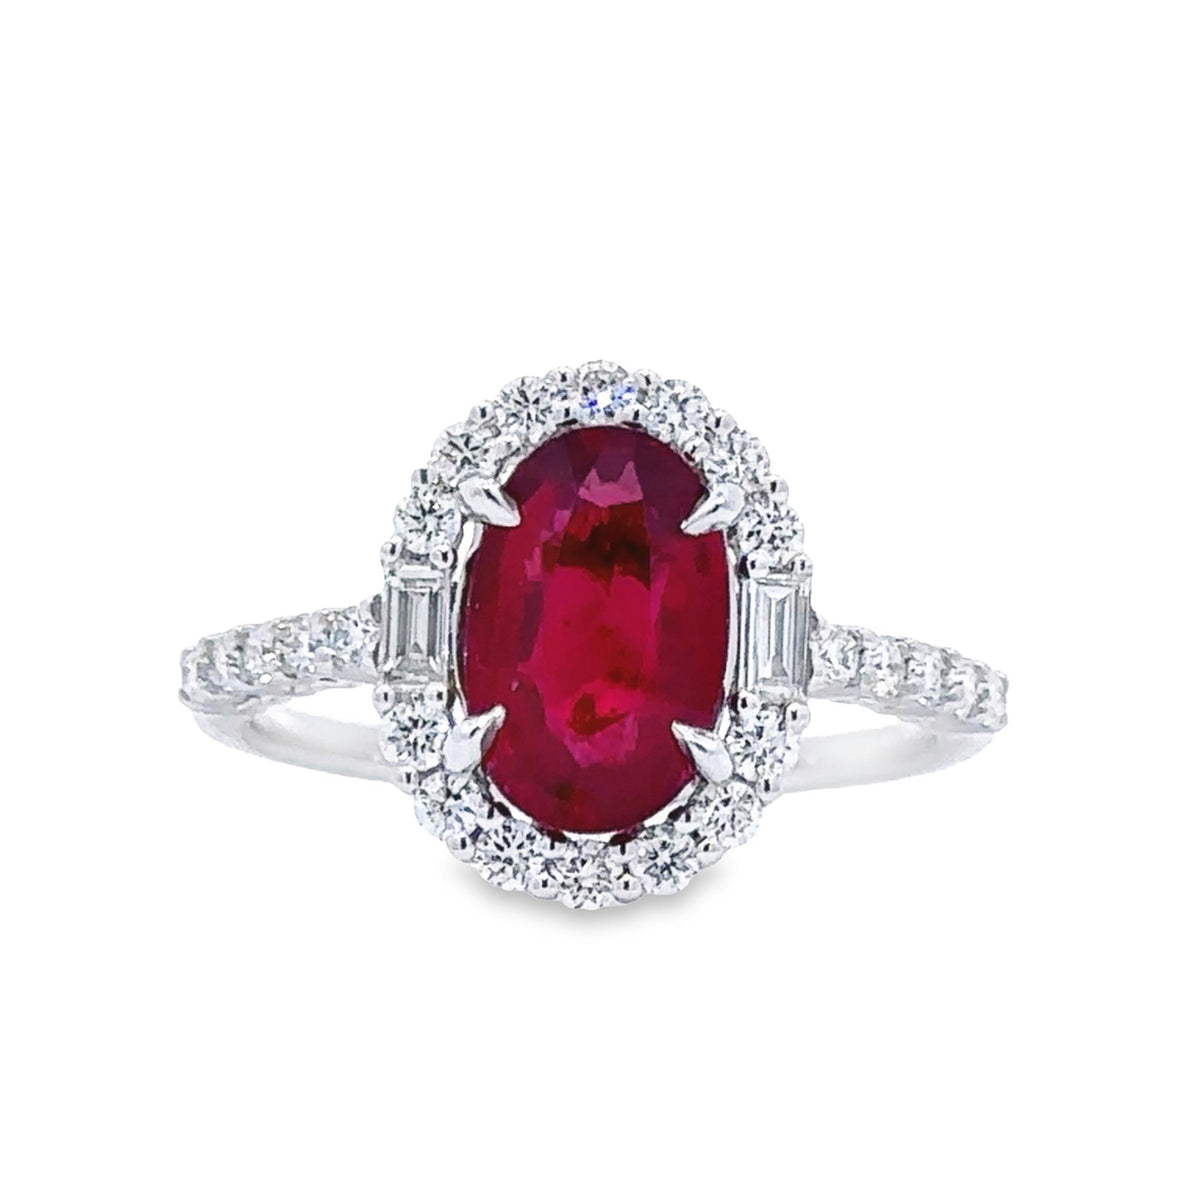 18Kt White Gold Halo Gemstone Ring With 1.98ct Ruby